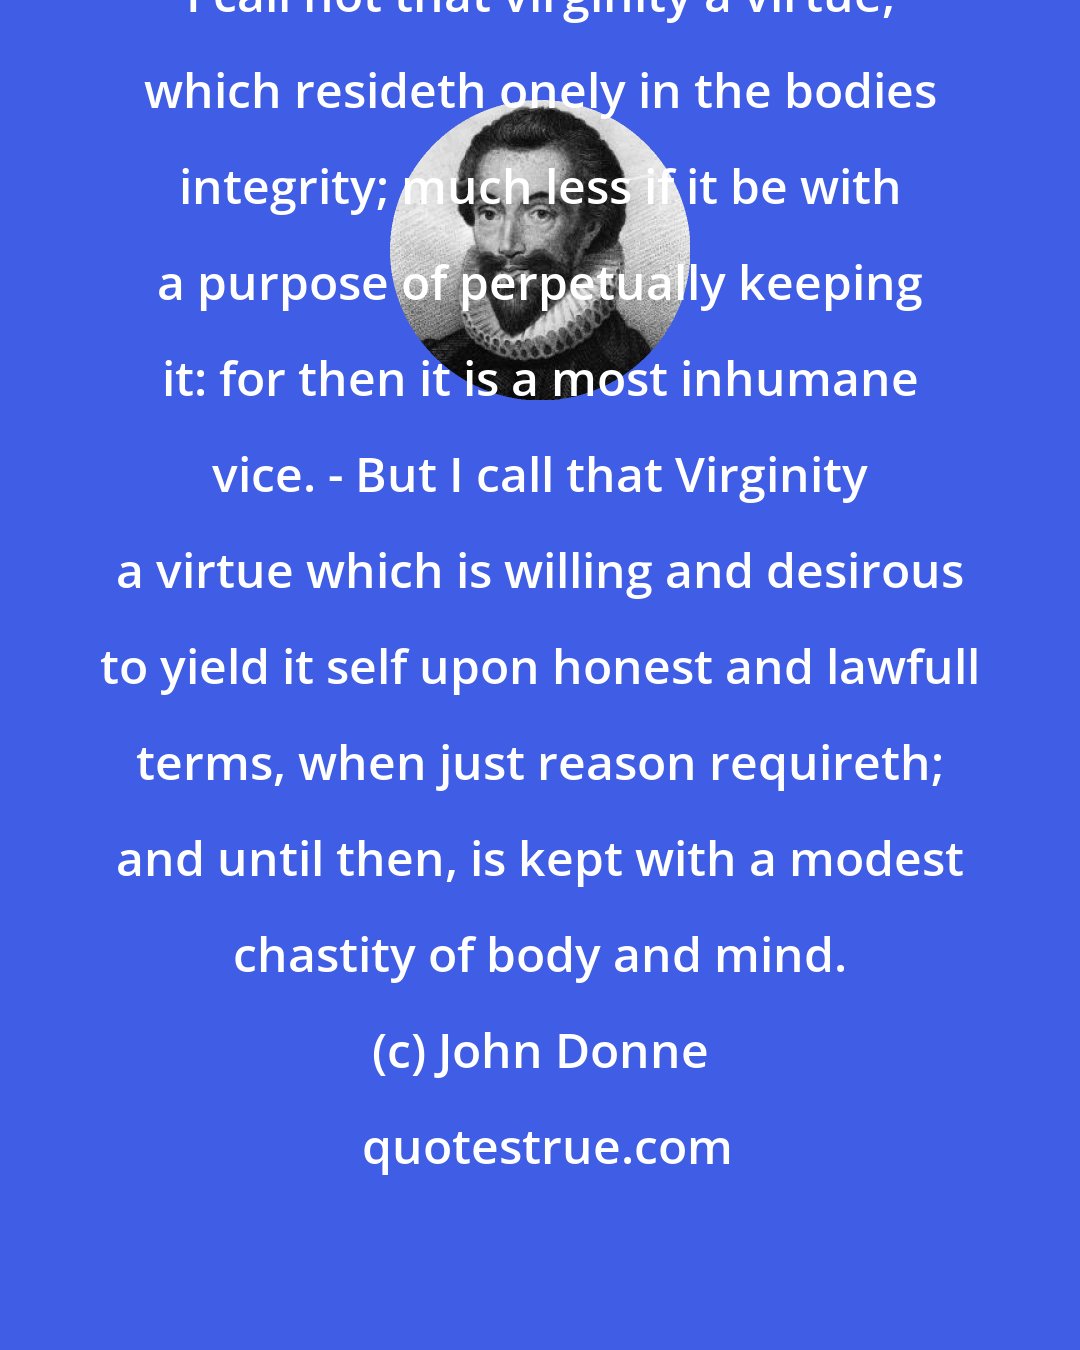 John Donne: I call not that virginity a virtue, which resideth onely in the bodies integrity; much less if it be with a purpose of perpetually keeping it: for then it is a most inhumane vice. - But I call that Virginity a virtue which is willing and desirous to yield it self upon honest and lawfull terms, when just reason requireth; and until then, is kept with a modest chastity of body and mind.